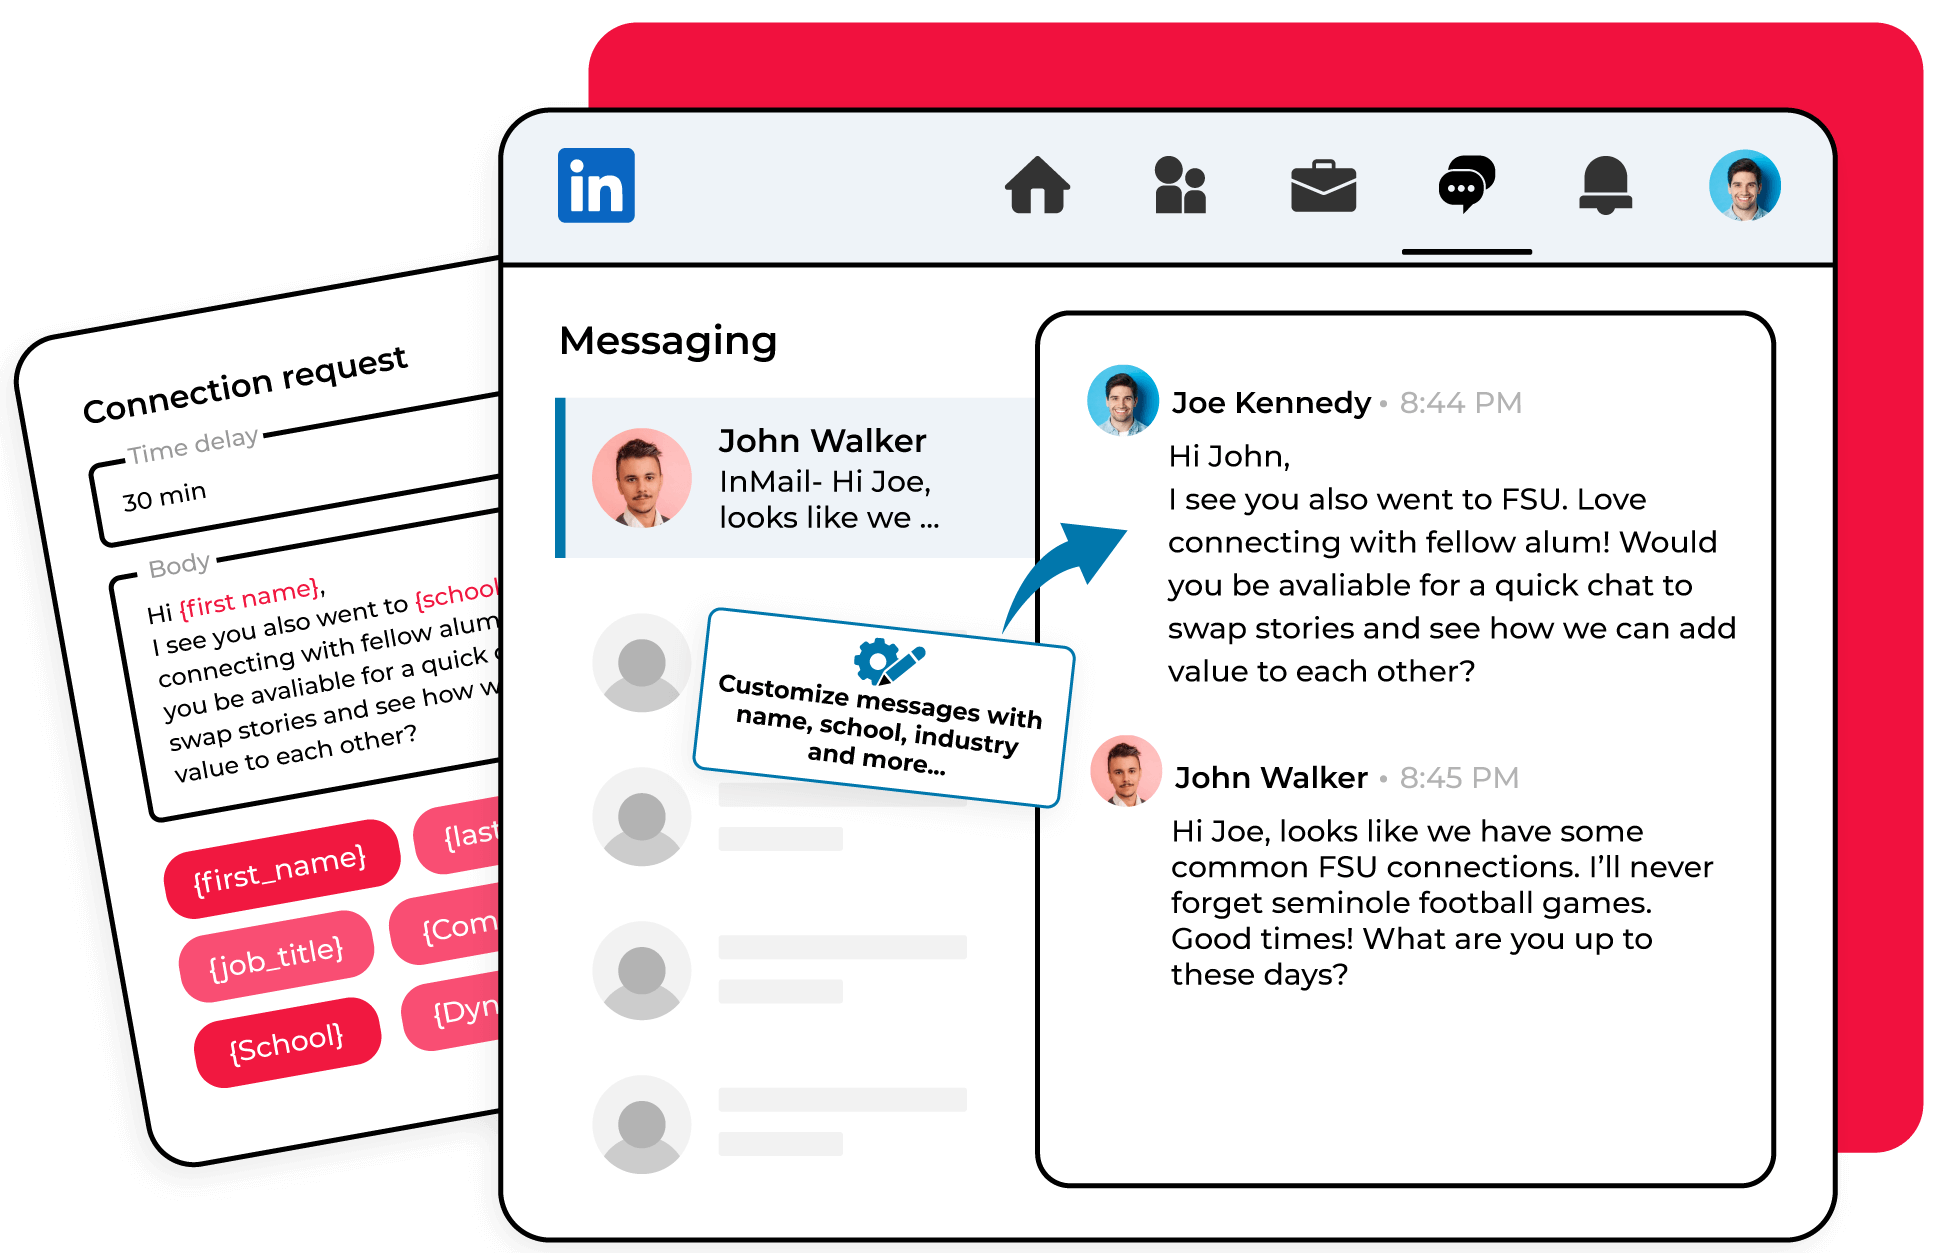 Hyper Personalize Your Messaging: If you’re looking for a way to stand out in your prospect’s inbox, hyper personalize your messaging using tags that automatically fill in your prospect's name, industry, company and more!